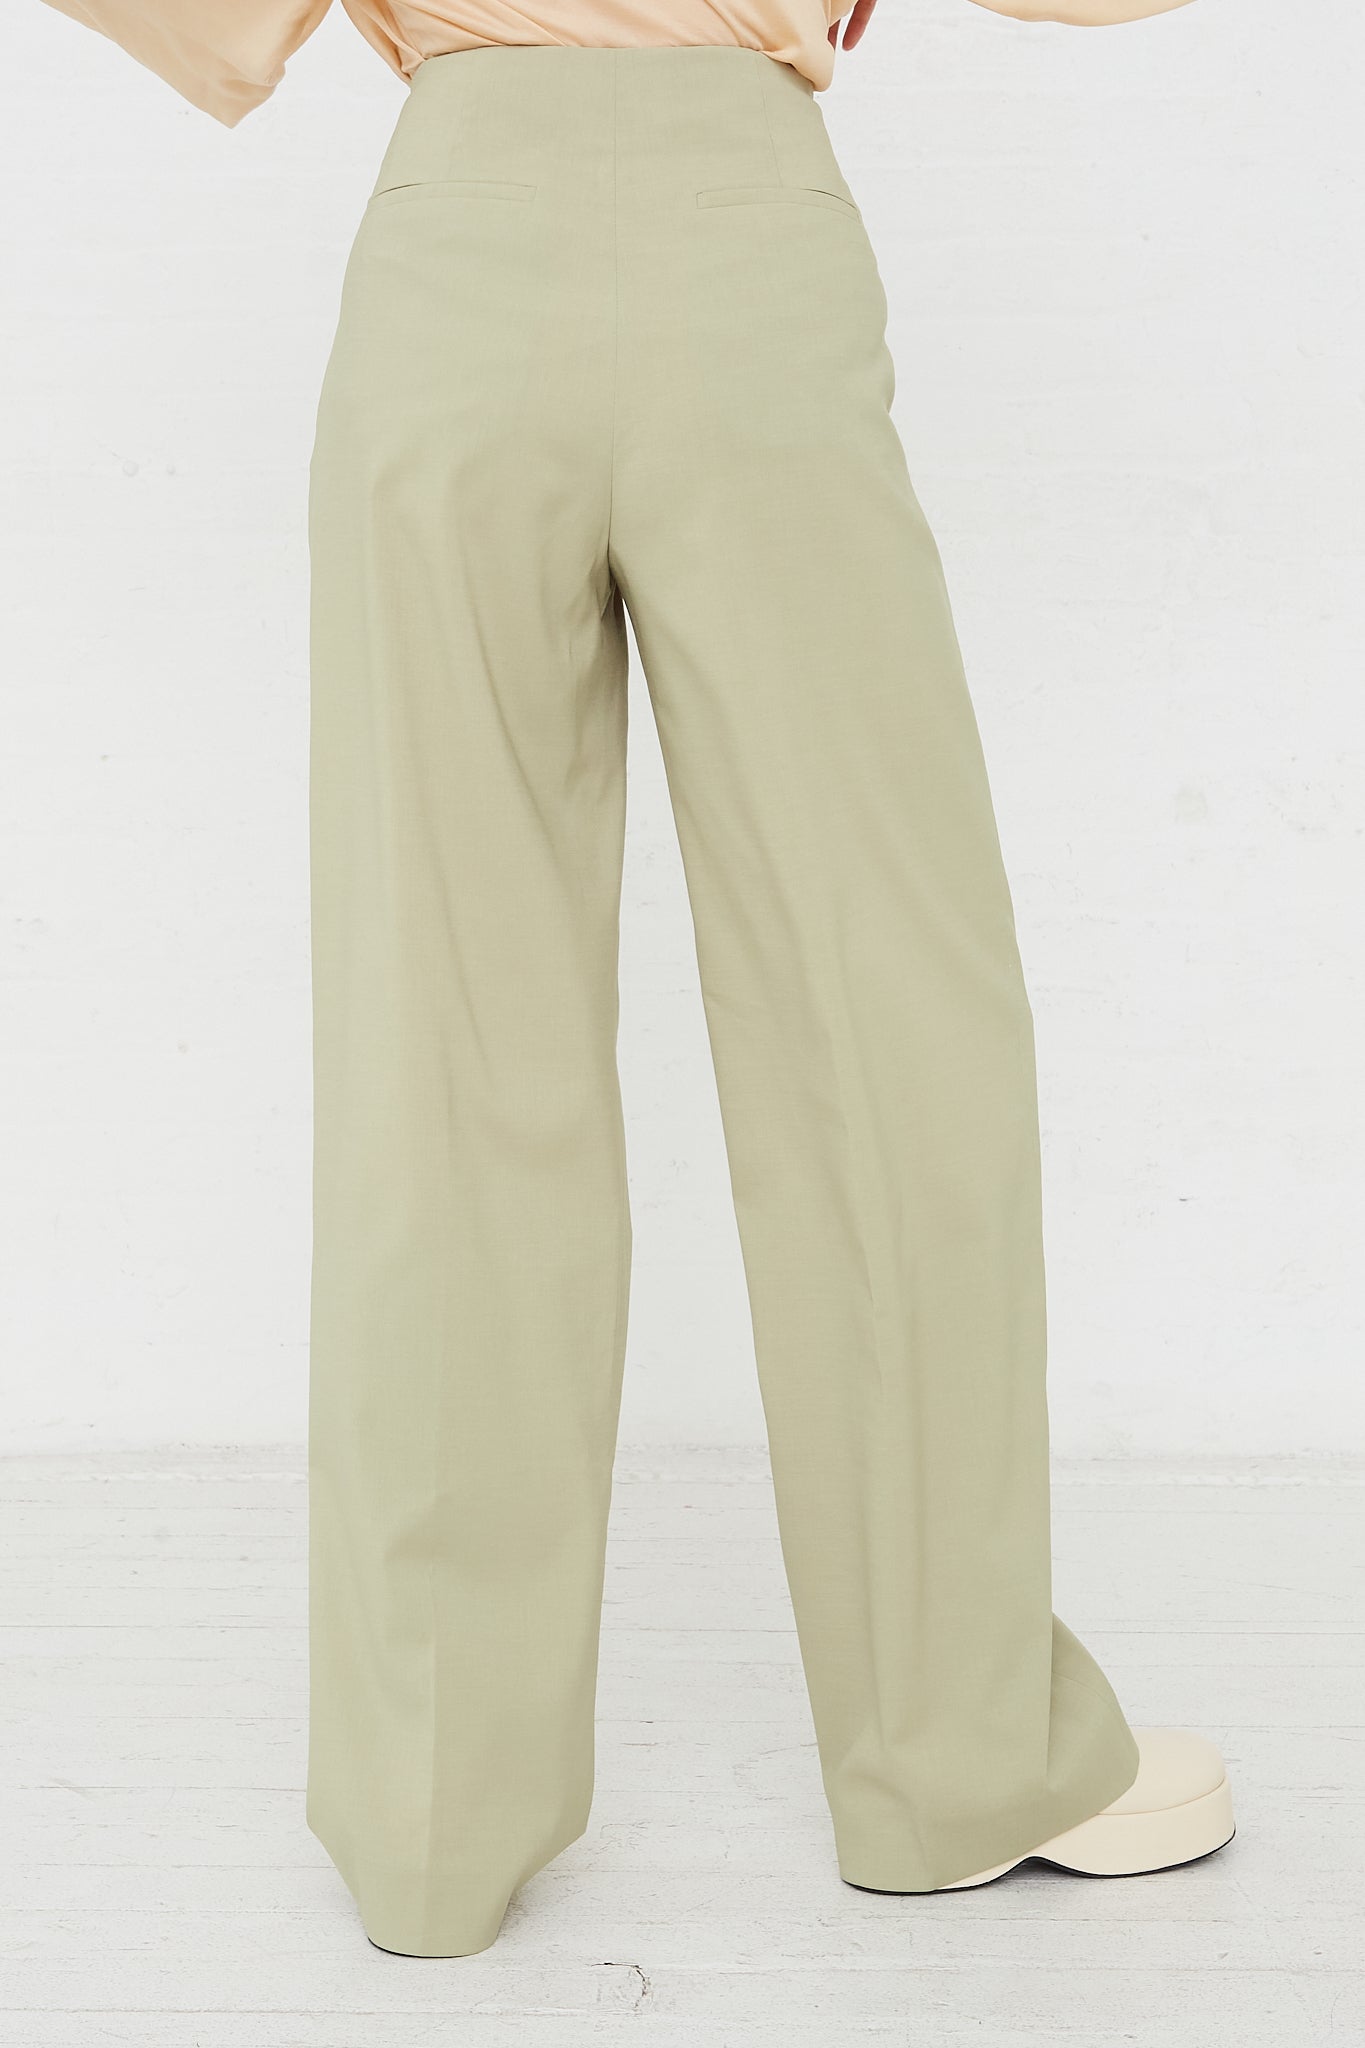 The back view of a woman wearing Rejina Pyo's Reine Trouser in Sage, in a minimalist style.